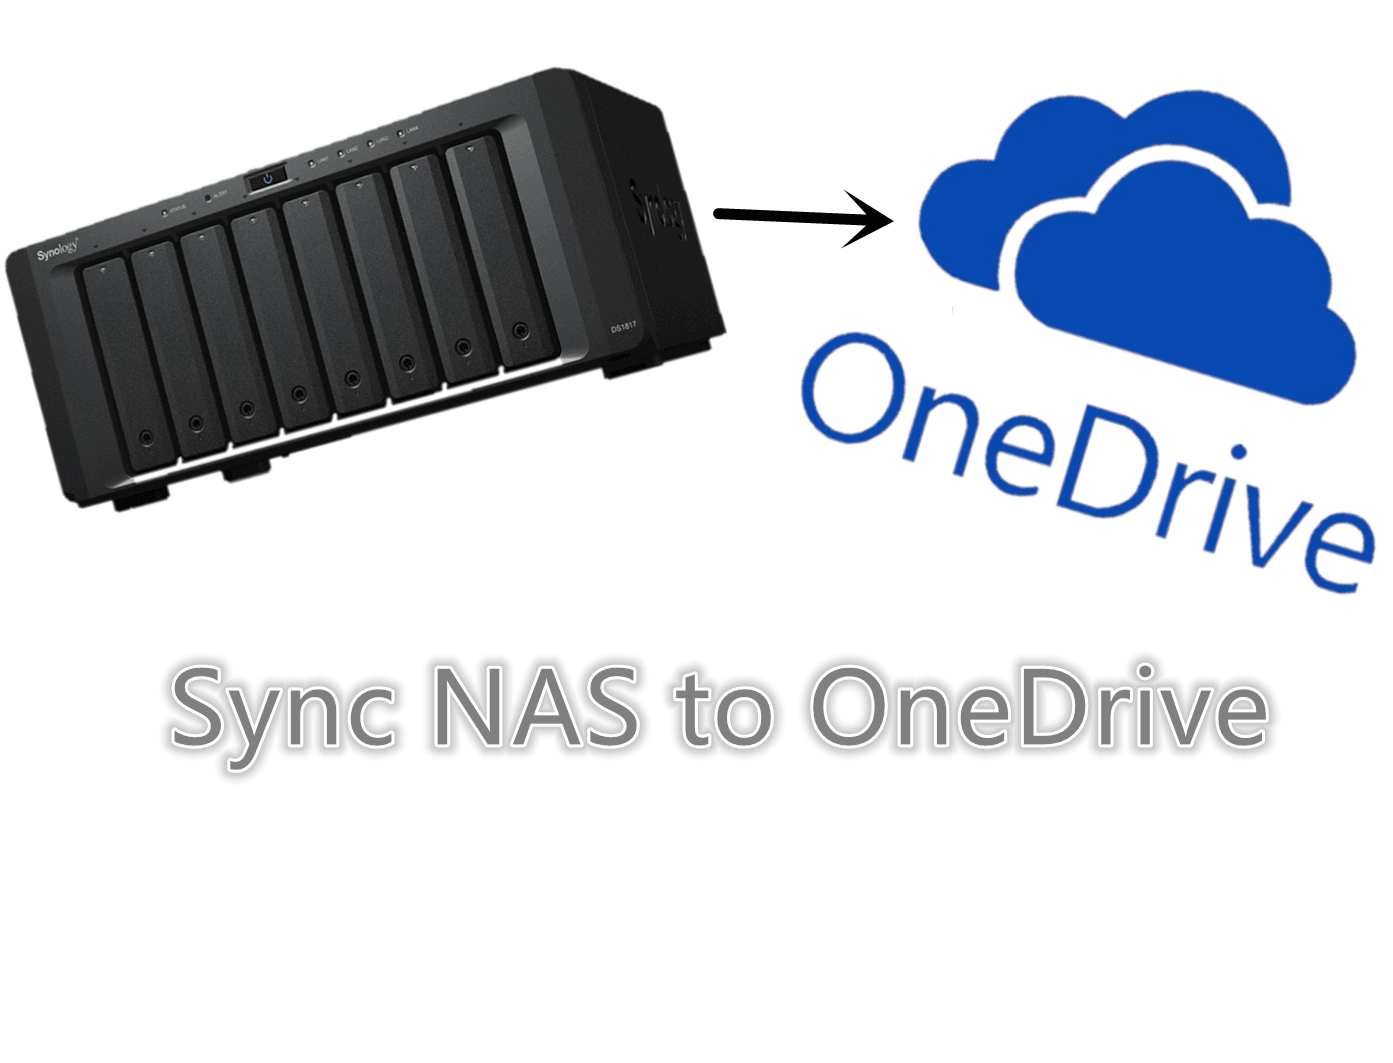 Sync NAS to OneDrive